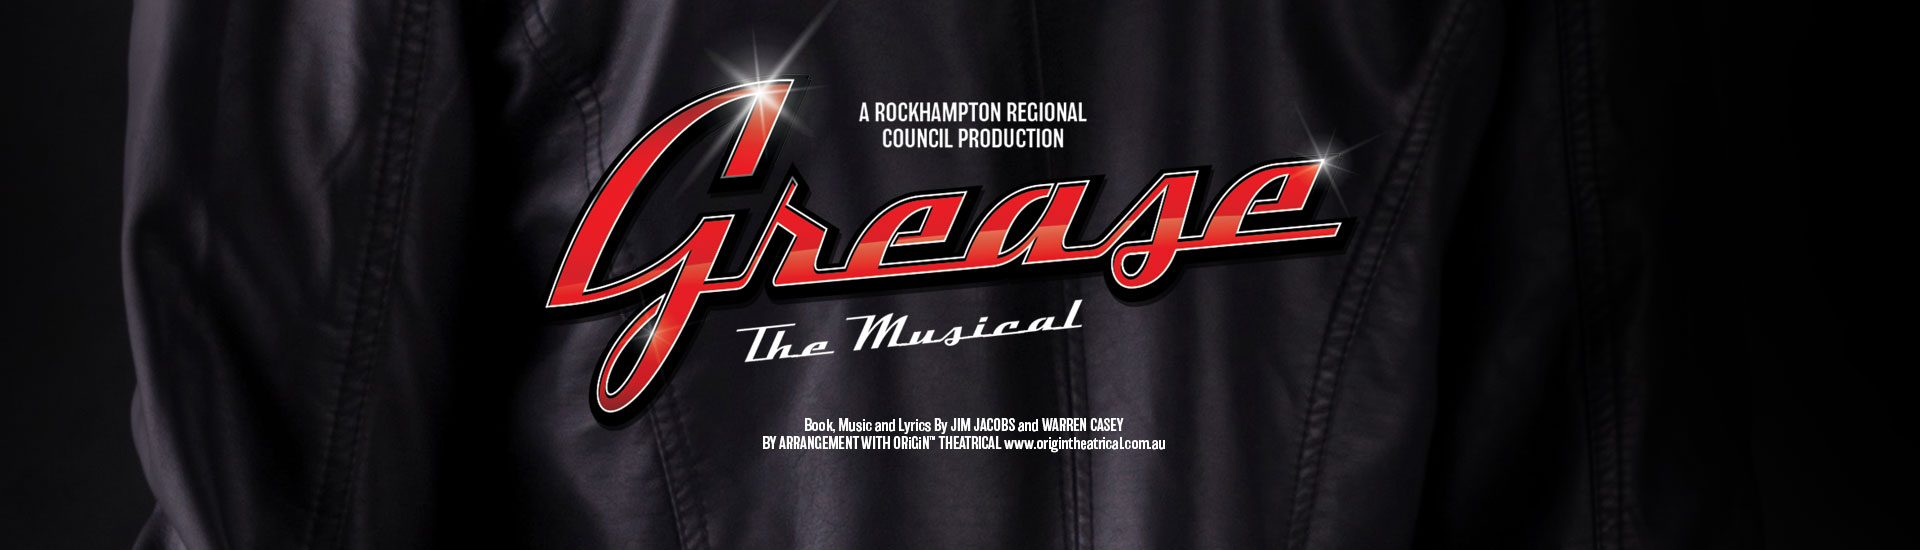 RRC-Grease-2024---Seeitlive-1920x550px.jpg